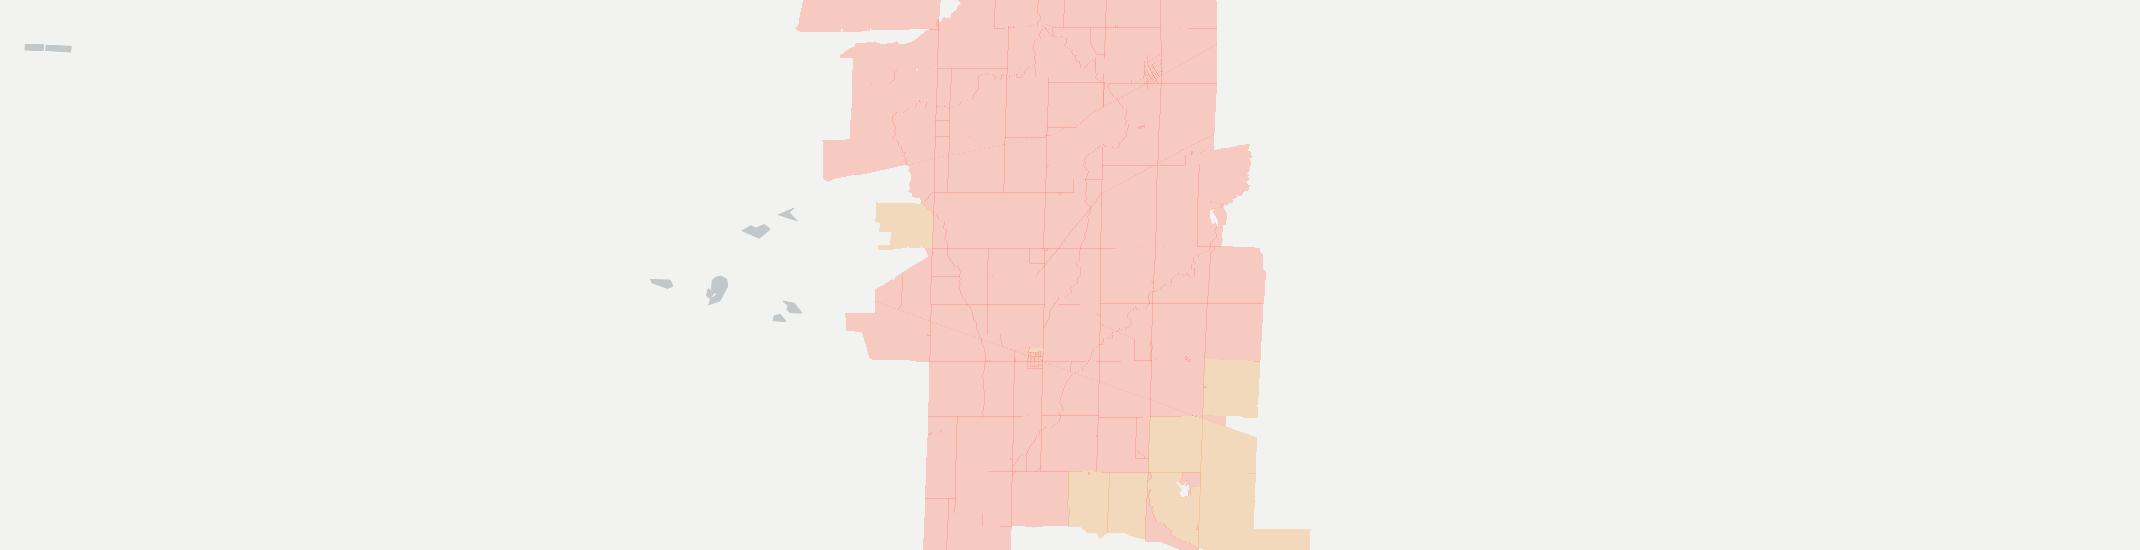 Benton City Internet Competition Map. Click for interactive map.